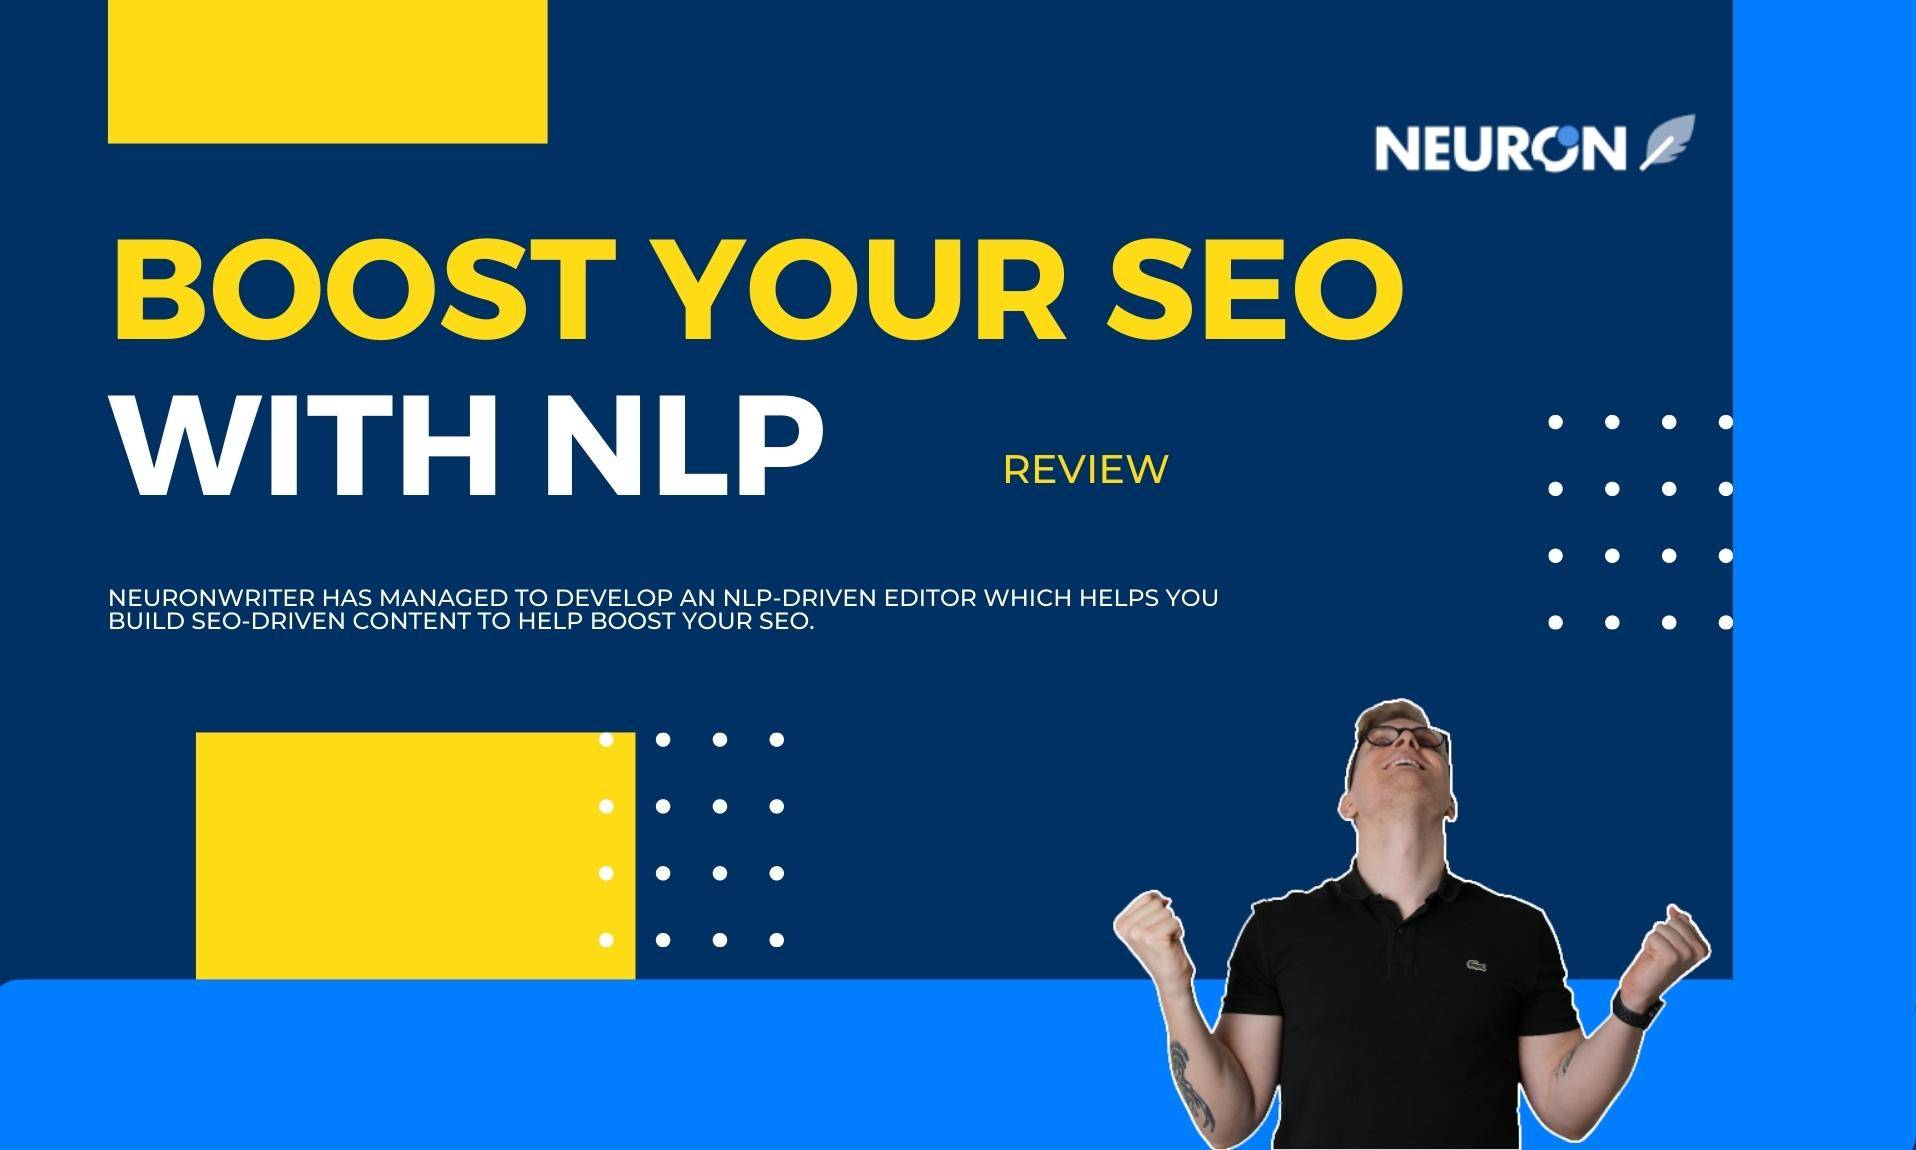 Neuronwriter Review - An SEO NLP-Editor For Your Content